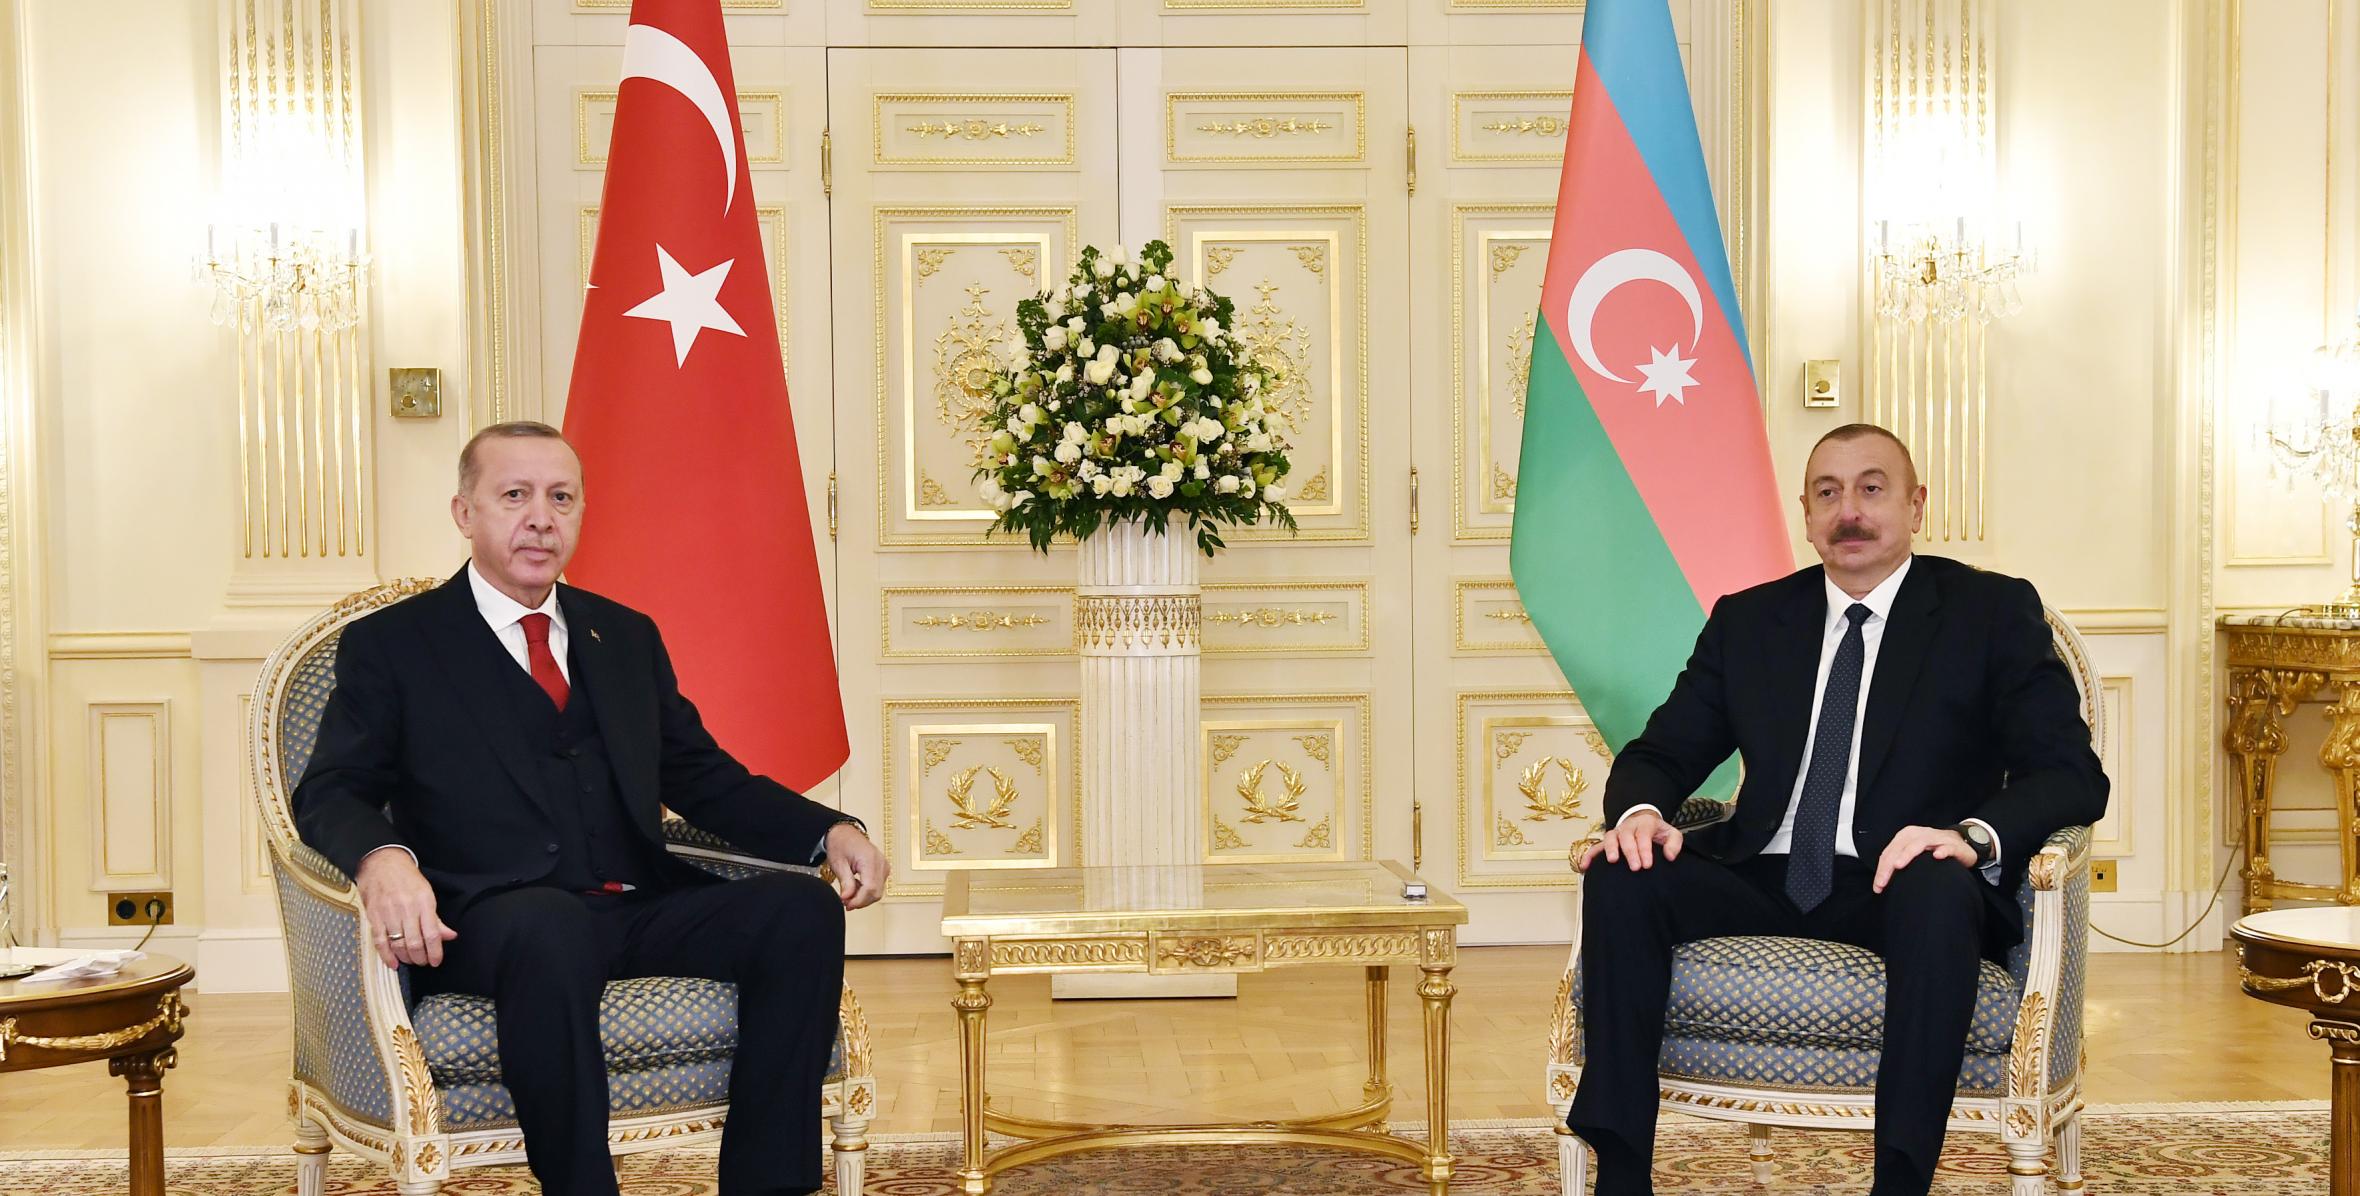 Presidents of Azerbaijan and Turkey held a one-on-one meeting